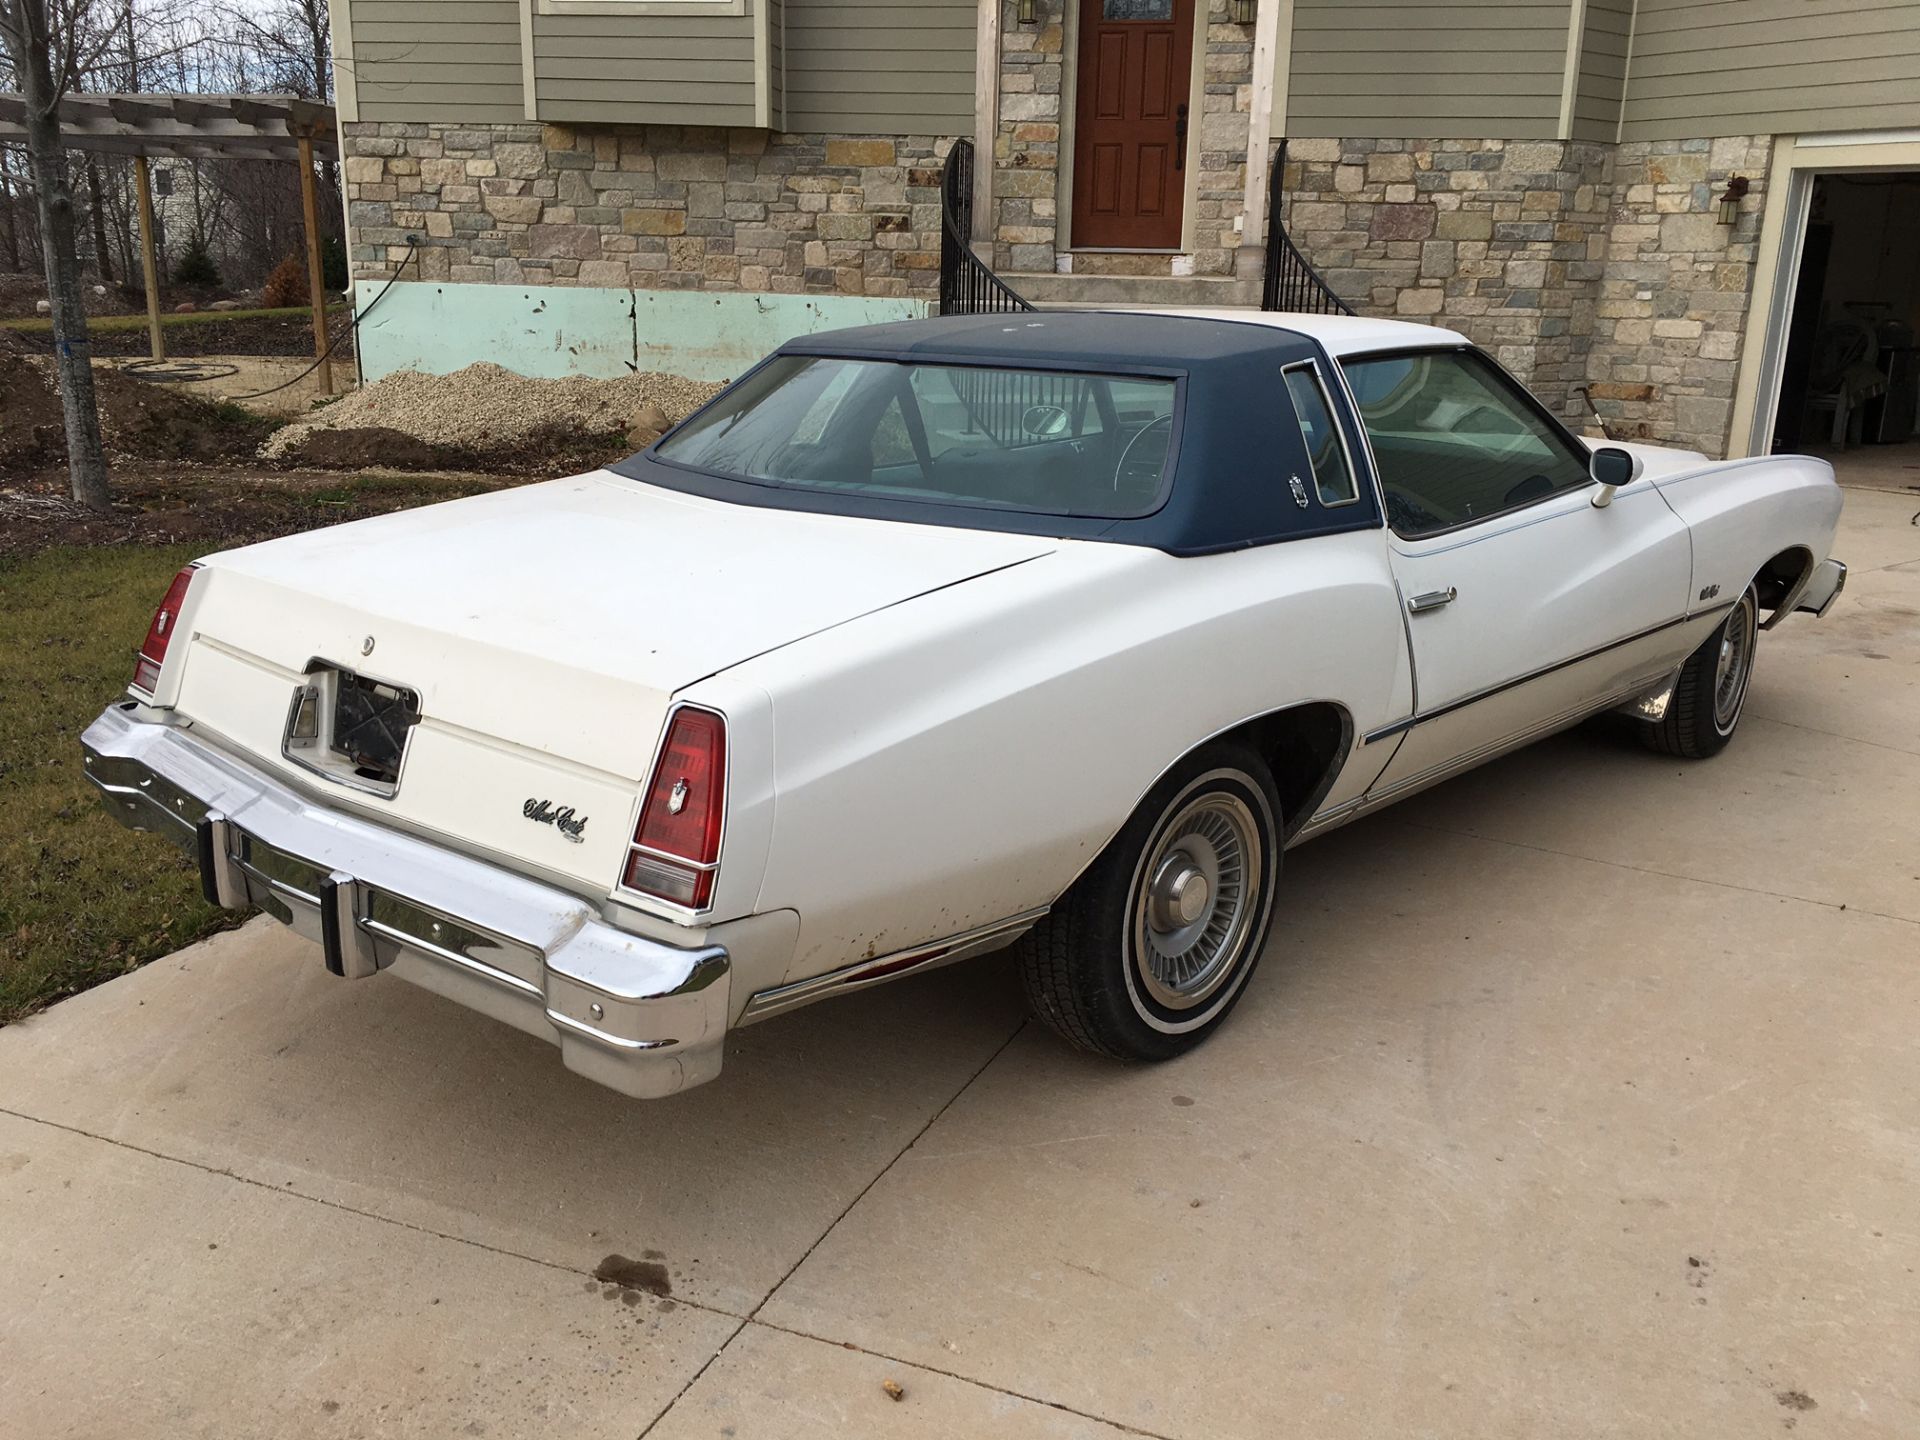 CHEVROLET MONTE CARLO; ONE OWNER; 75000 MILES, ALL ORIGINAL - Image 2 of 20